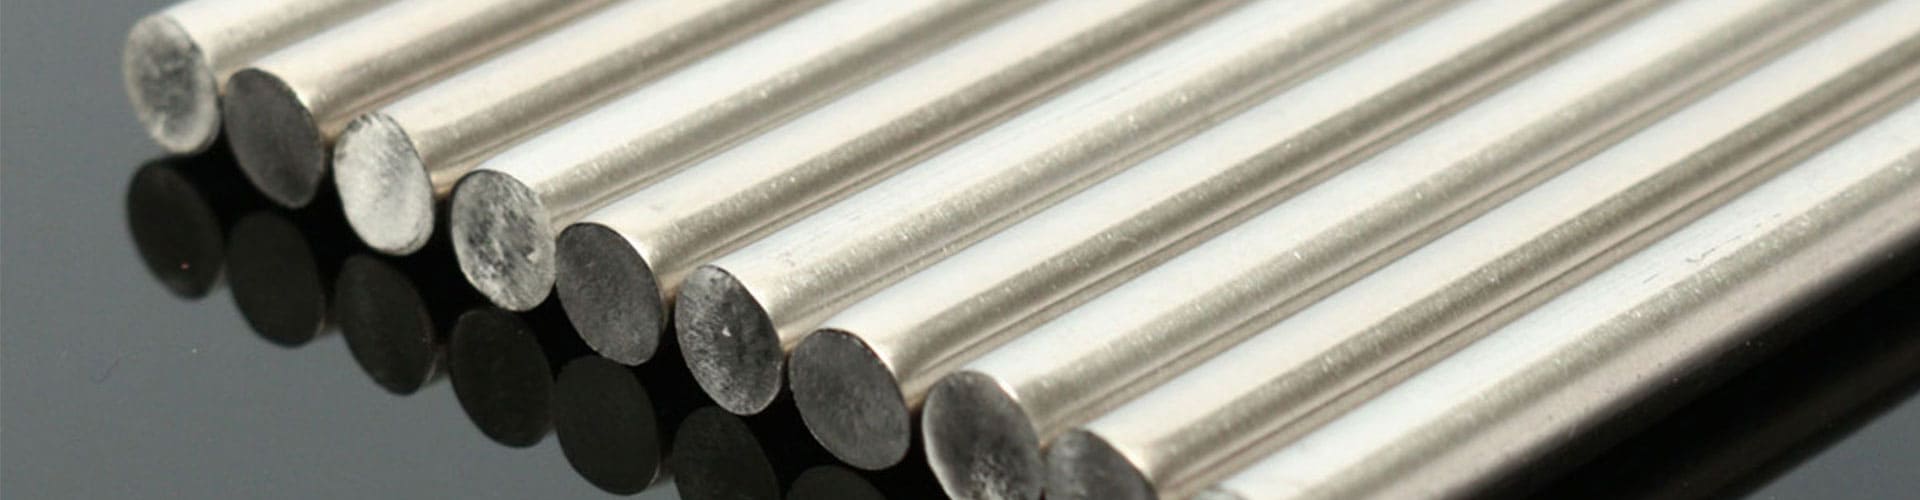 nickel-alloy-201-round-bars-rods-manufacturer-exporter-supplier-in-united-states